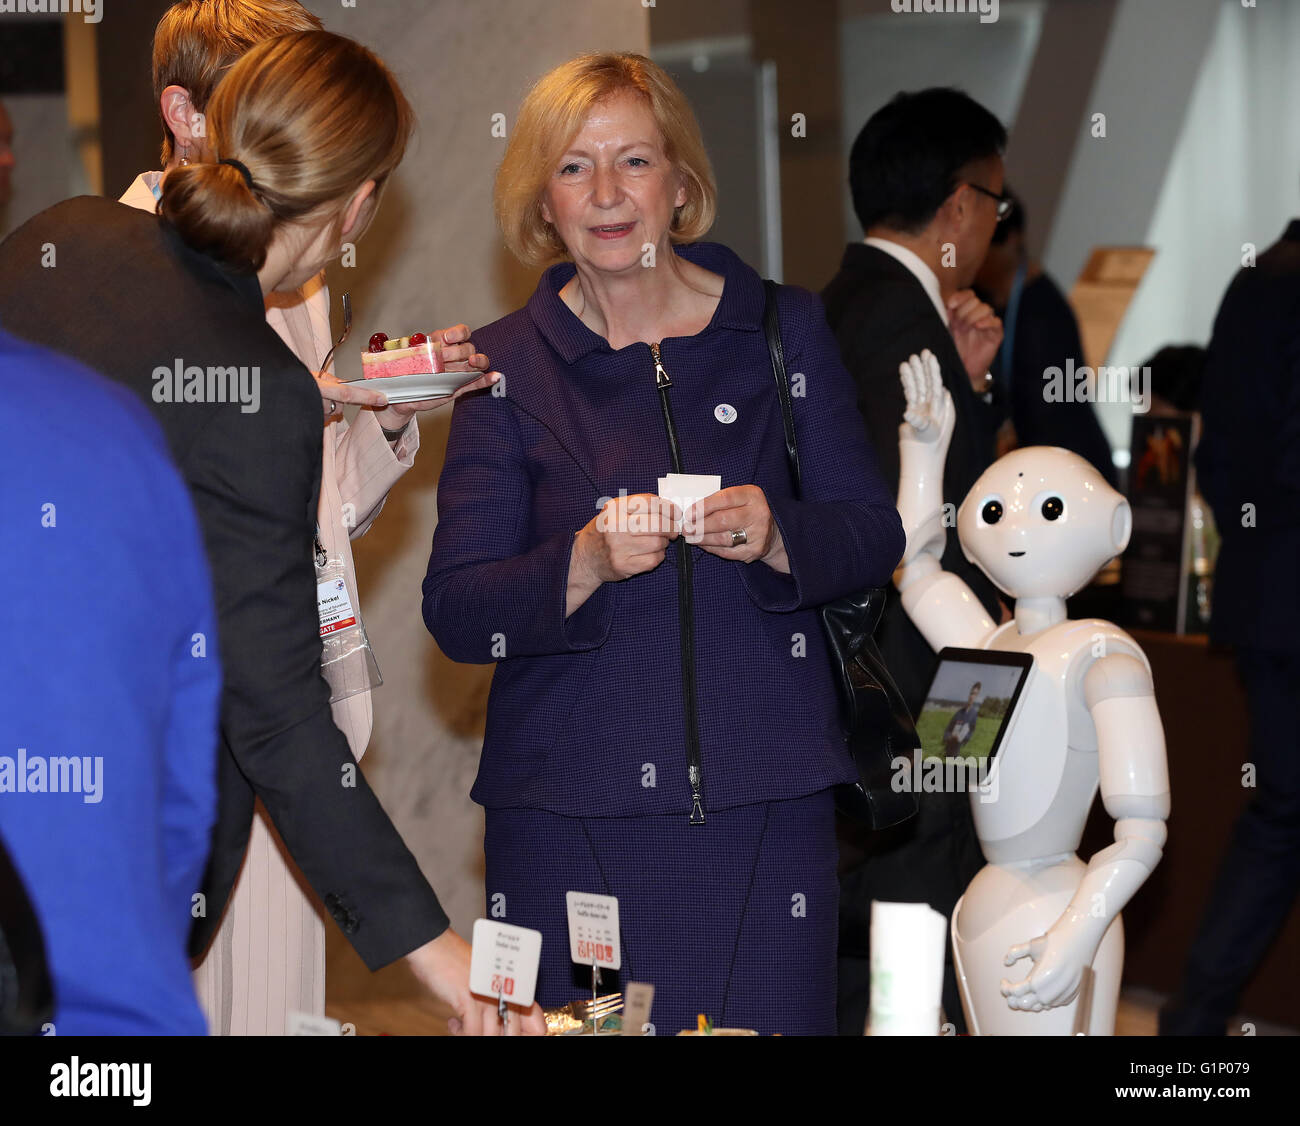 Tsukuba, Japan. 17th May, 2016. German Education and Research Minister Johanna Wanka (C) and her delegation members enjoy sweets, while Softbank's humanoid robot Pepper (R) looks at her at a coffee break at the G7 Science and Technology Ministers' Meeting in Tsukuba in Ibaraki prefecture on Tuesday, May 17, 2016. © Yoshio Tsunoda/AFLO/Alamy Live News Stock Photo